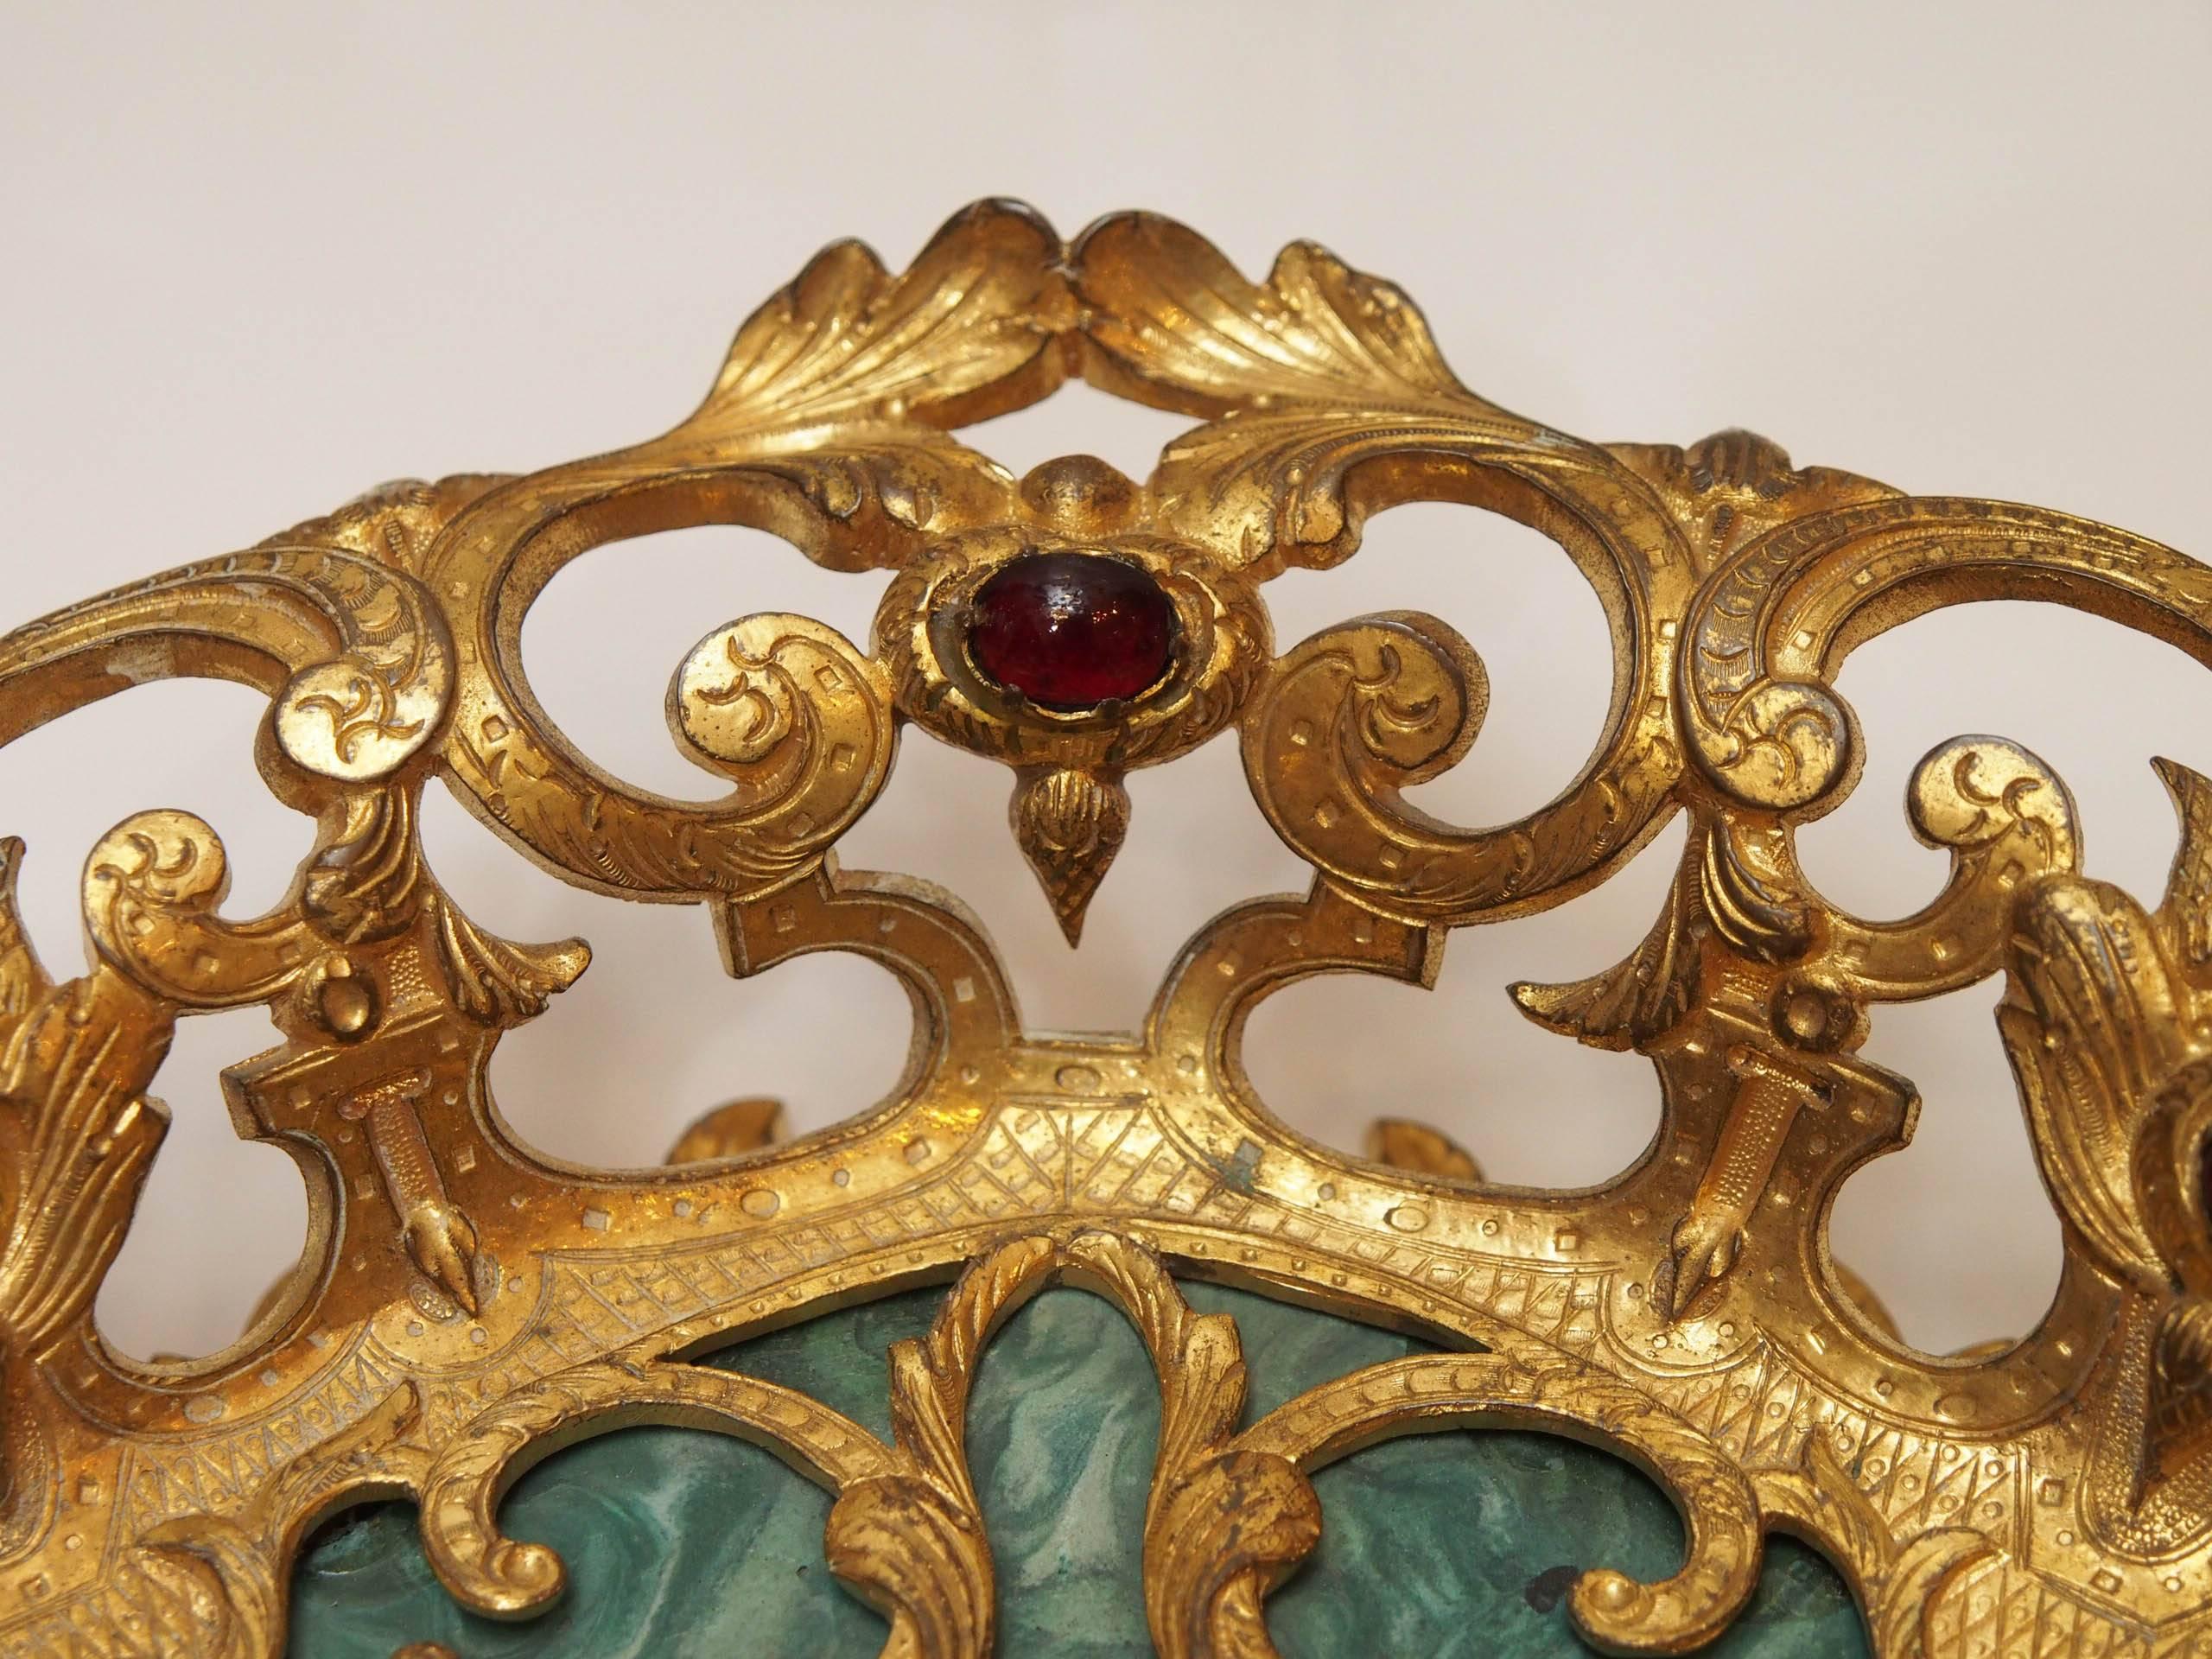 19th Century Italian Gilt Bronze and Jeweled with Malachite Base Tazza For Sale 2